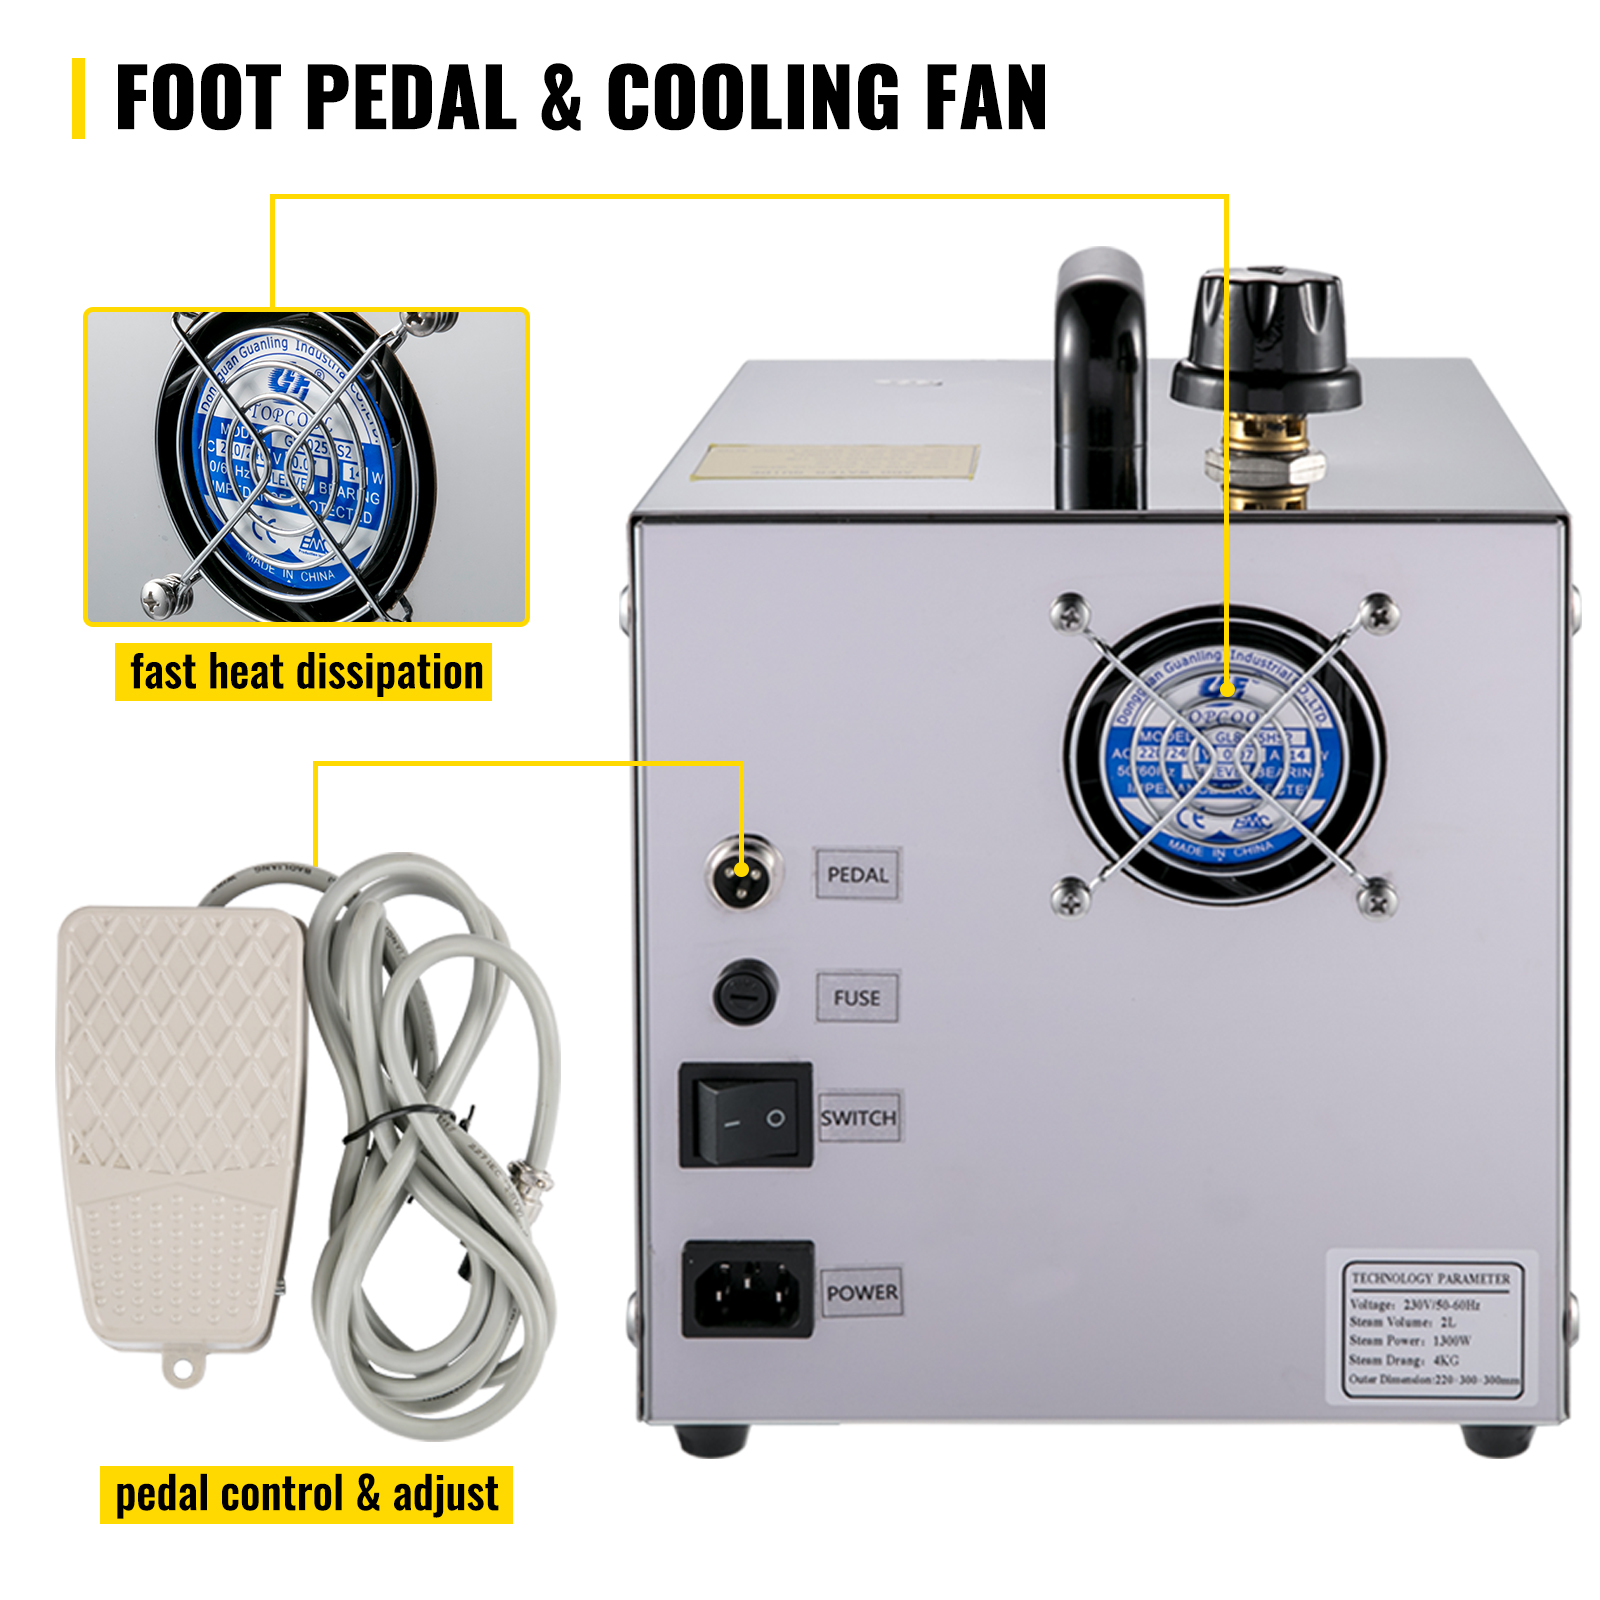 1300W Jewelry Cleaner Steam Cleaning Machine Gold And Silver Stainless  Steel 2L Silver & Gold Steam Cleaner Goldsmith Equipment For Gold Sliver